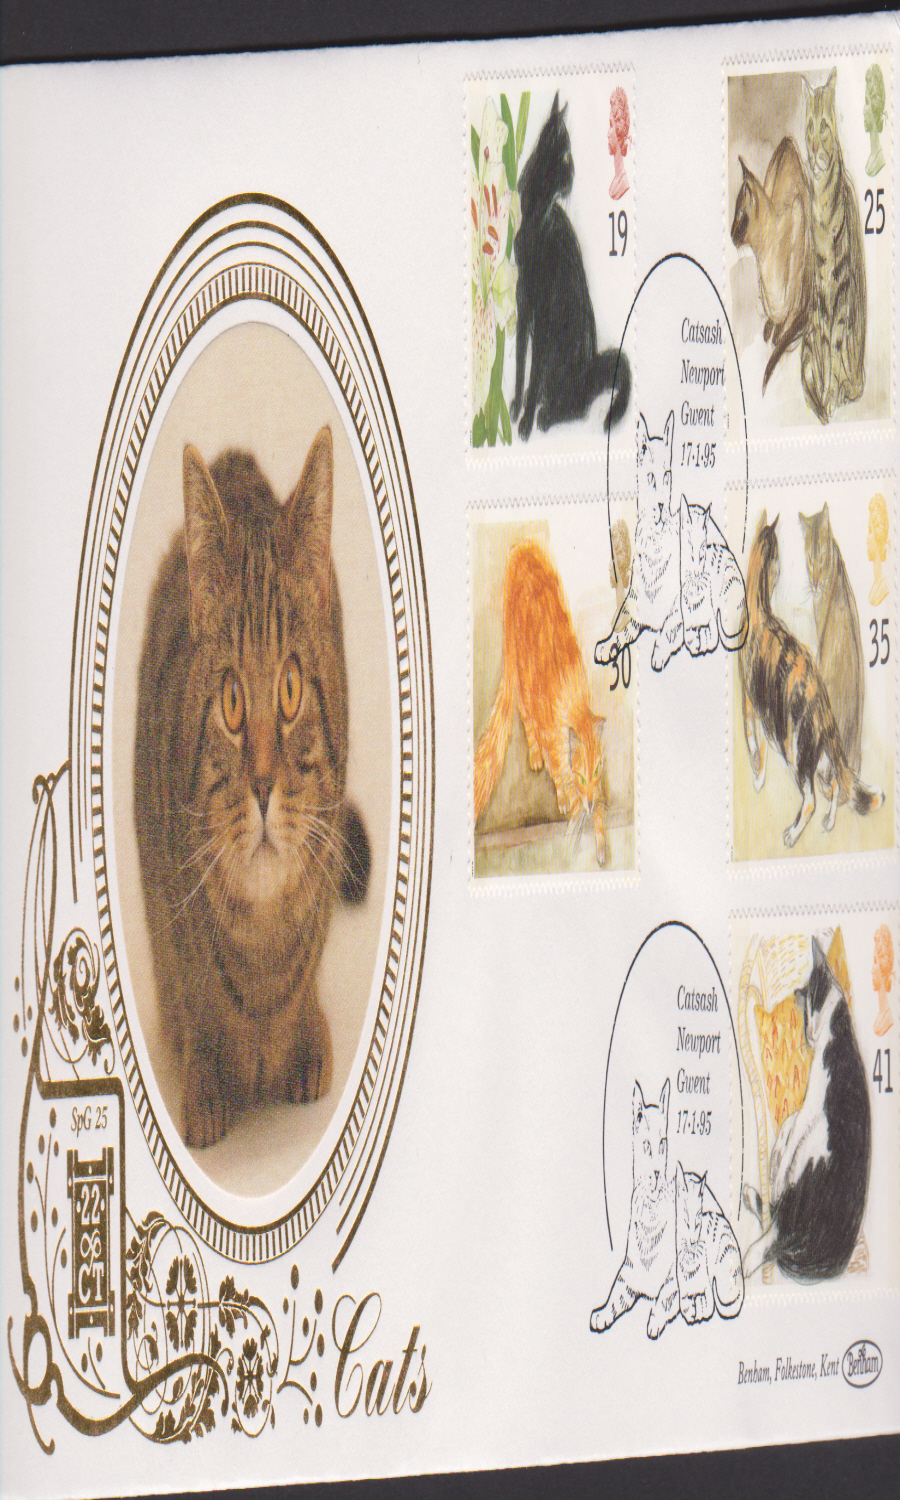 1995 -Benham Cats First Day Cover - Catsash Postmark SPG25 - Click Image to Close